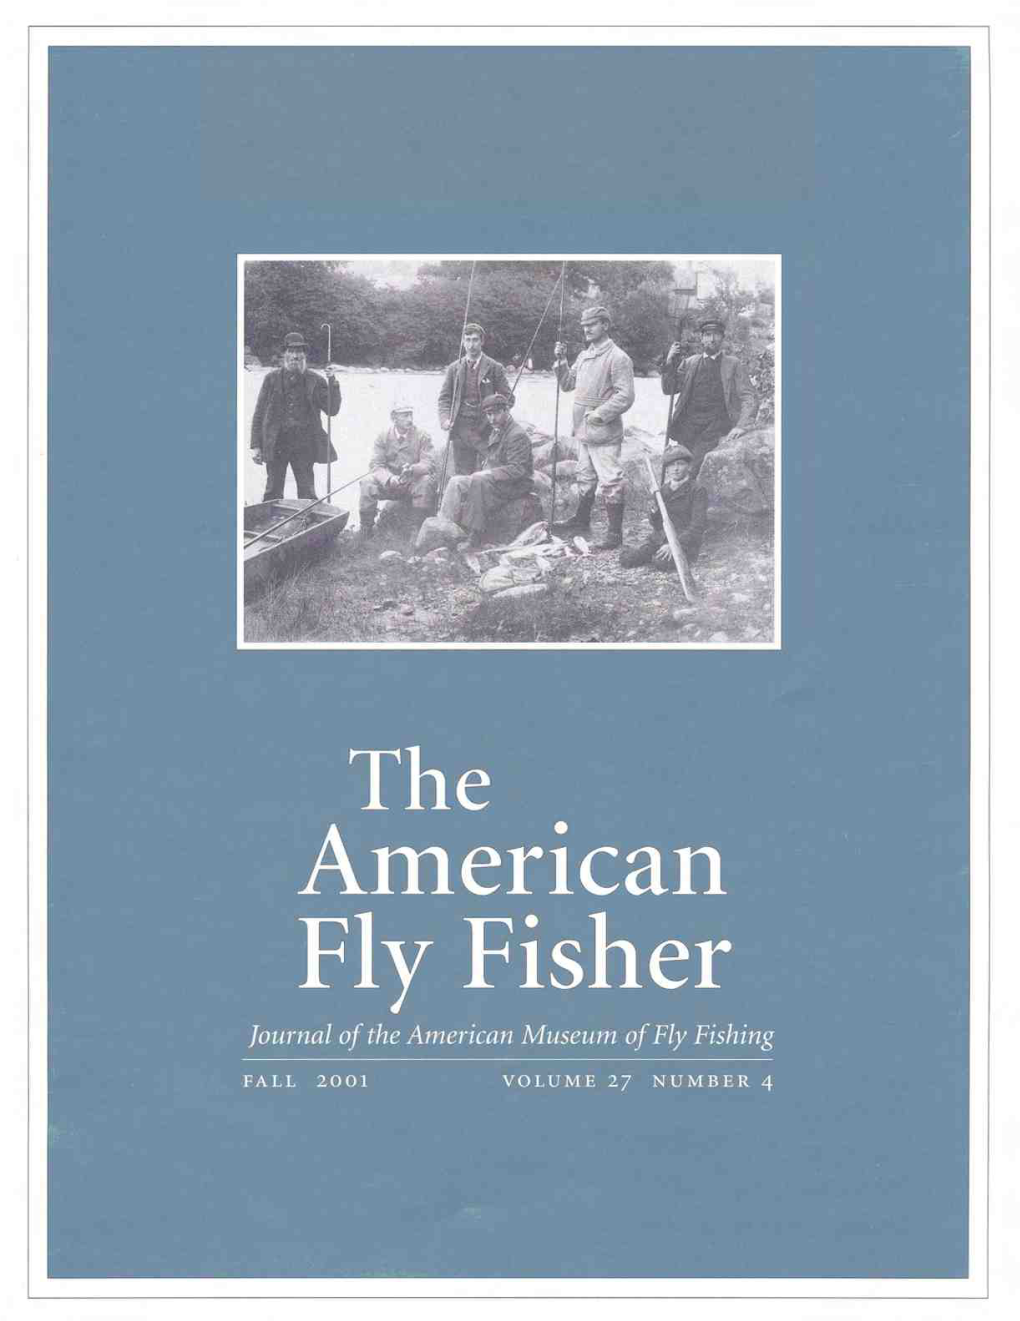 Fly Fisher Journal of the American Museum of Fly Fishing Crossing Lines